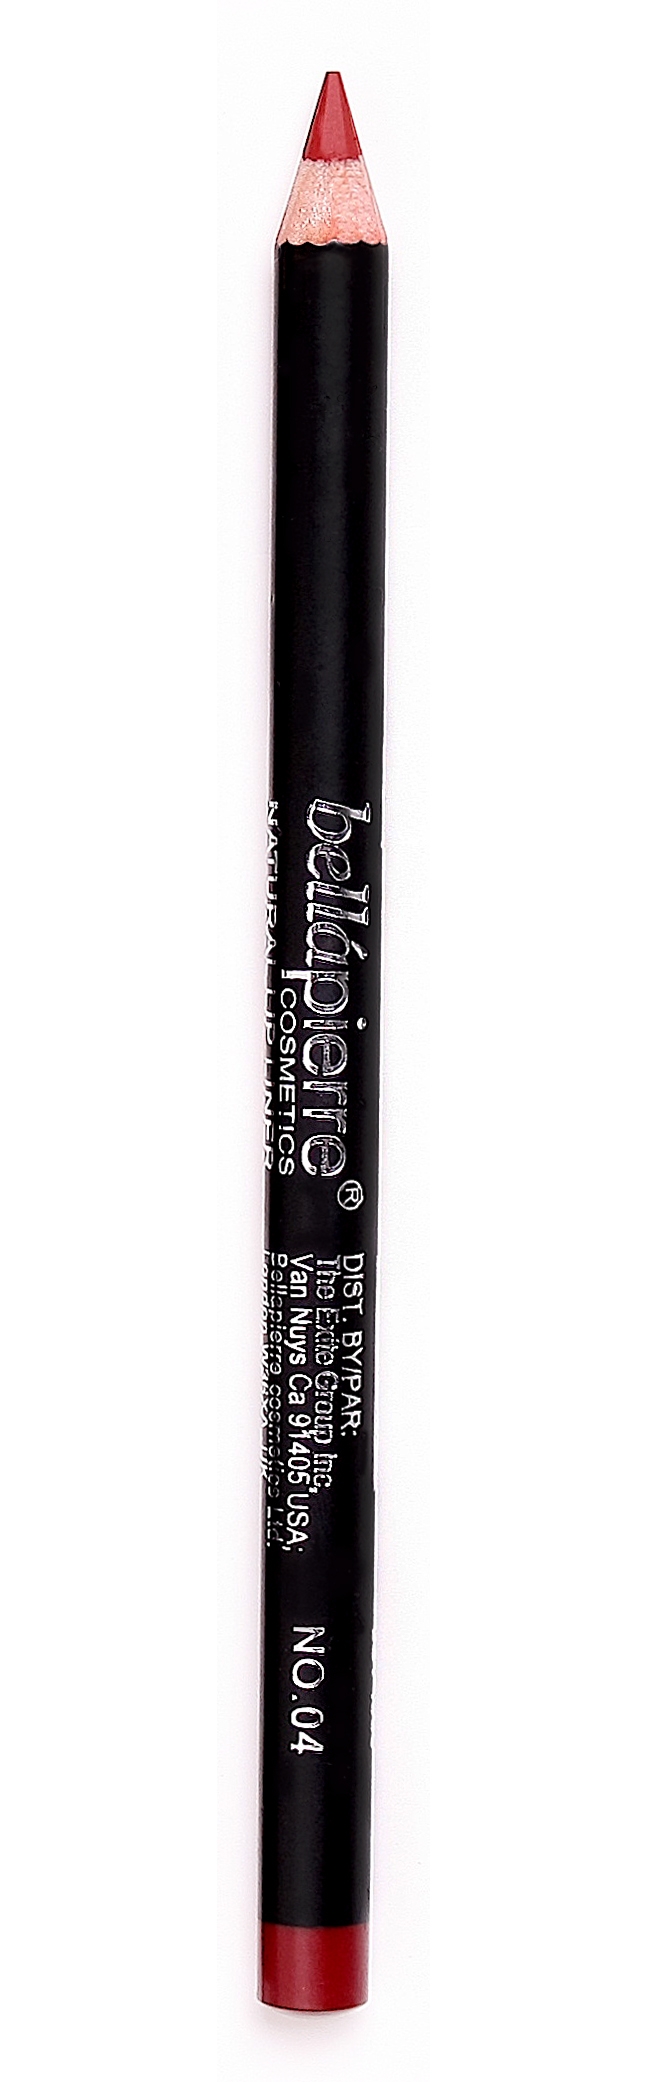 Bellapierre lip liner pencil 04 Truly red